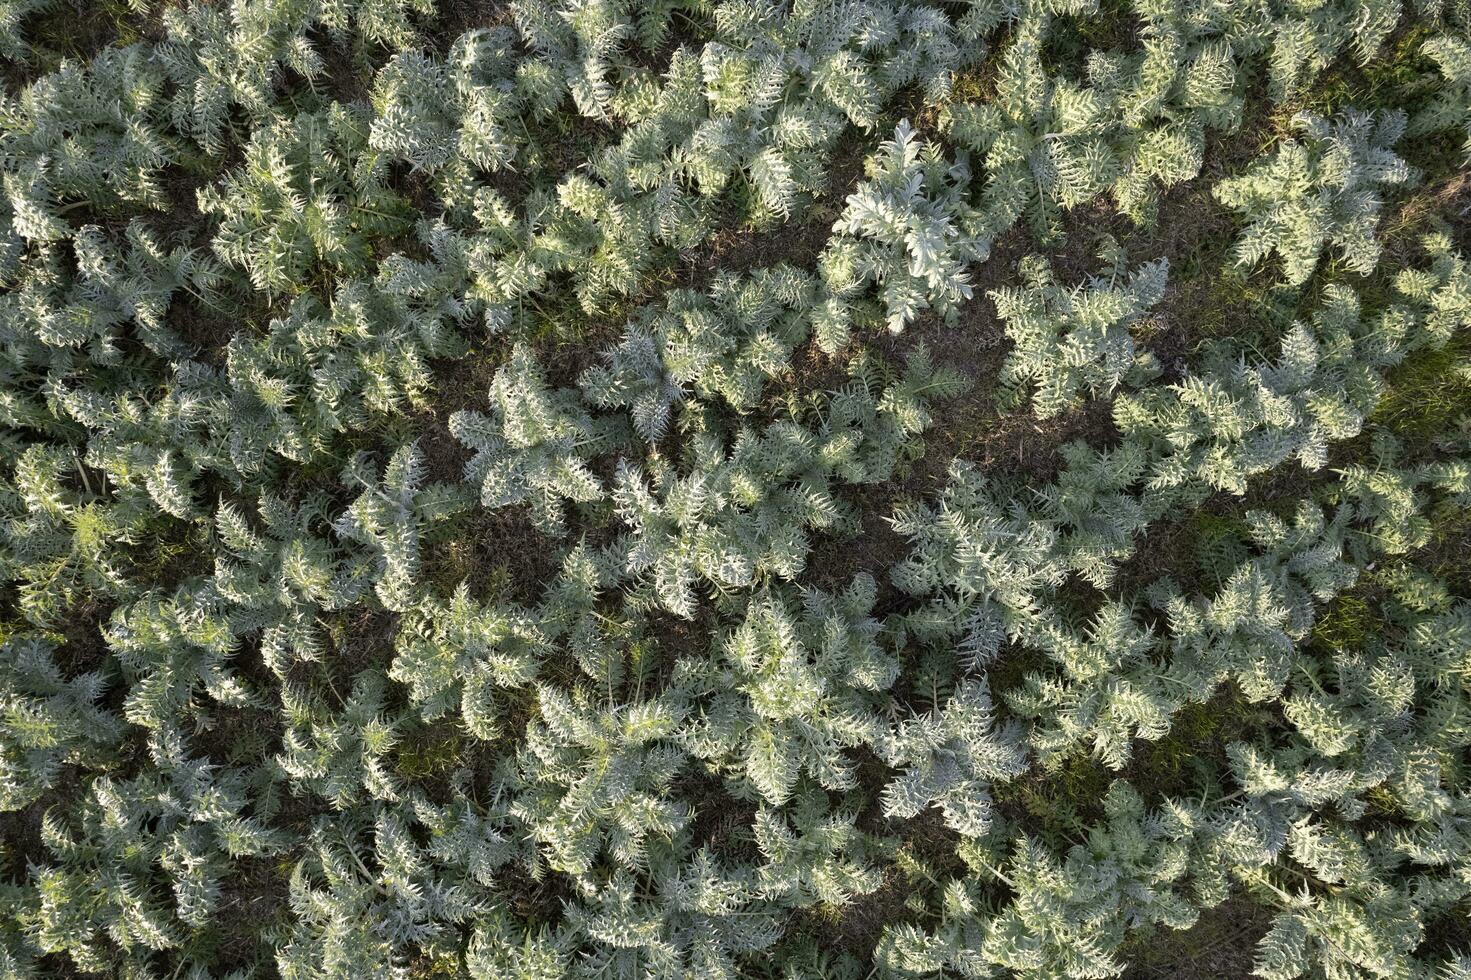 Aerial view of a growing hunchback thistle winter vegetable photo